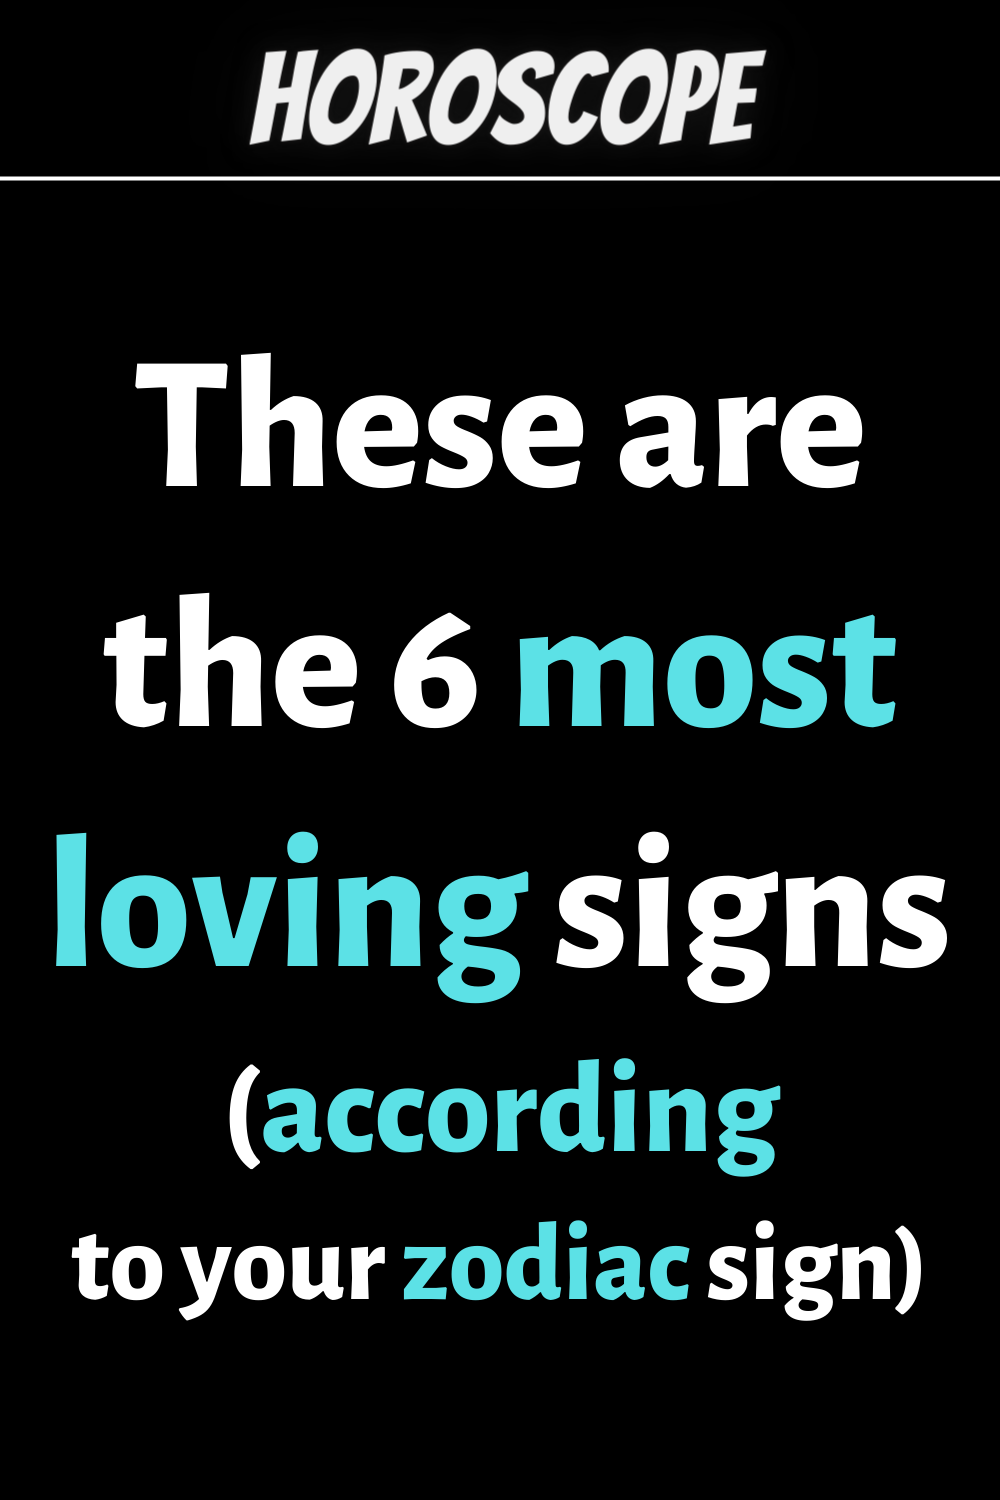 These are the 6 most loving zodiac signs in astrology